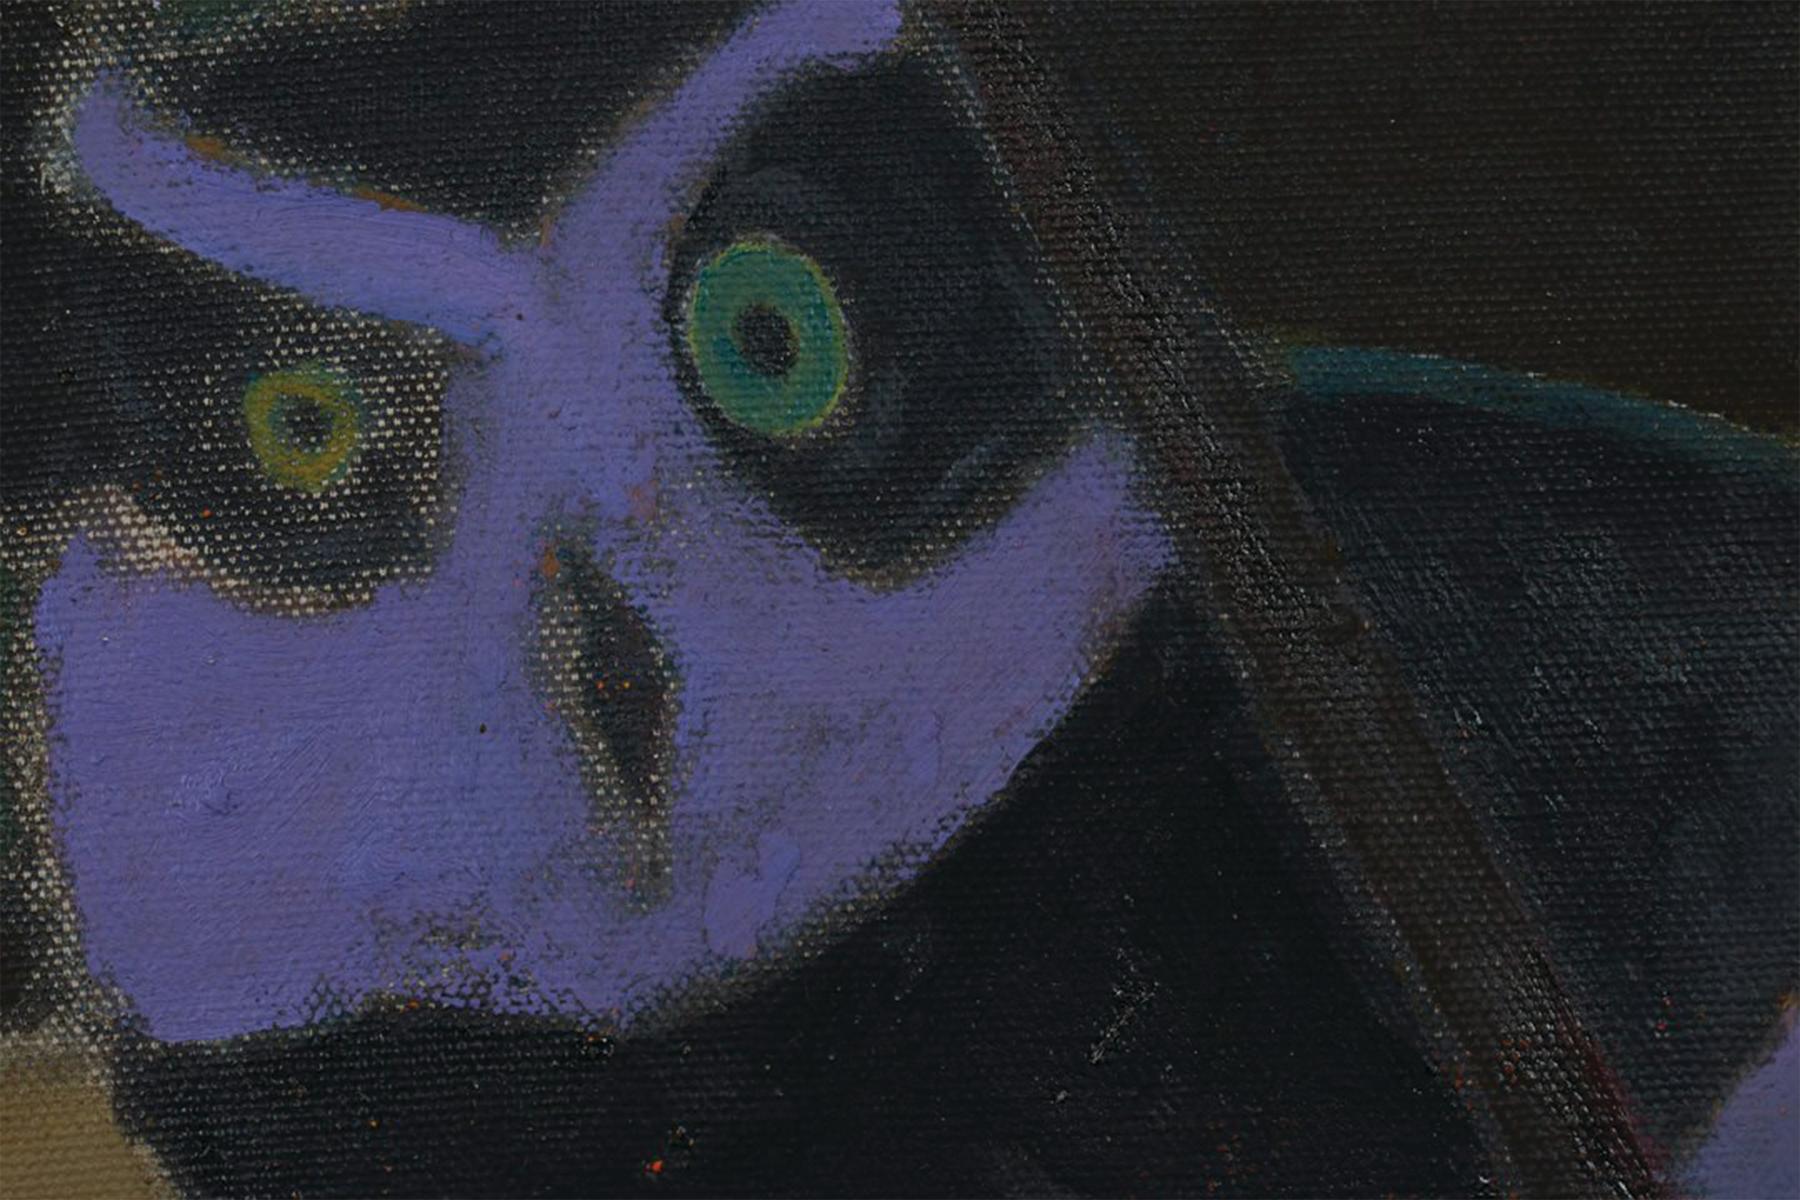 Two Owls, 20th Century Purple & Green Owls - Post-Impressionist Painting by Joseph O'Sickey